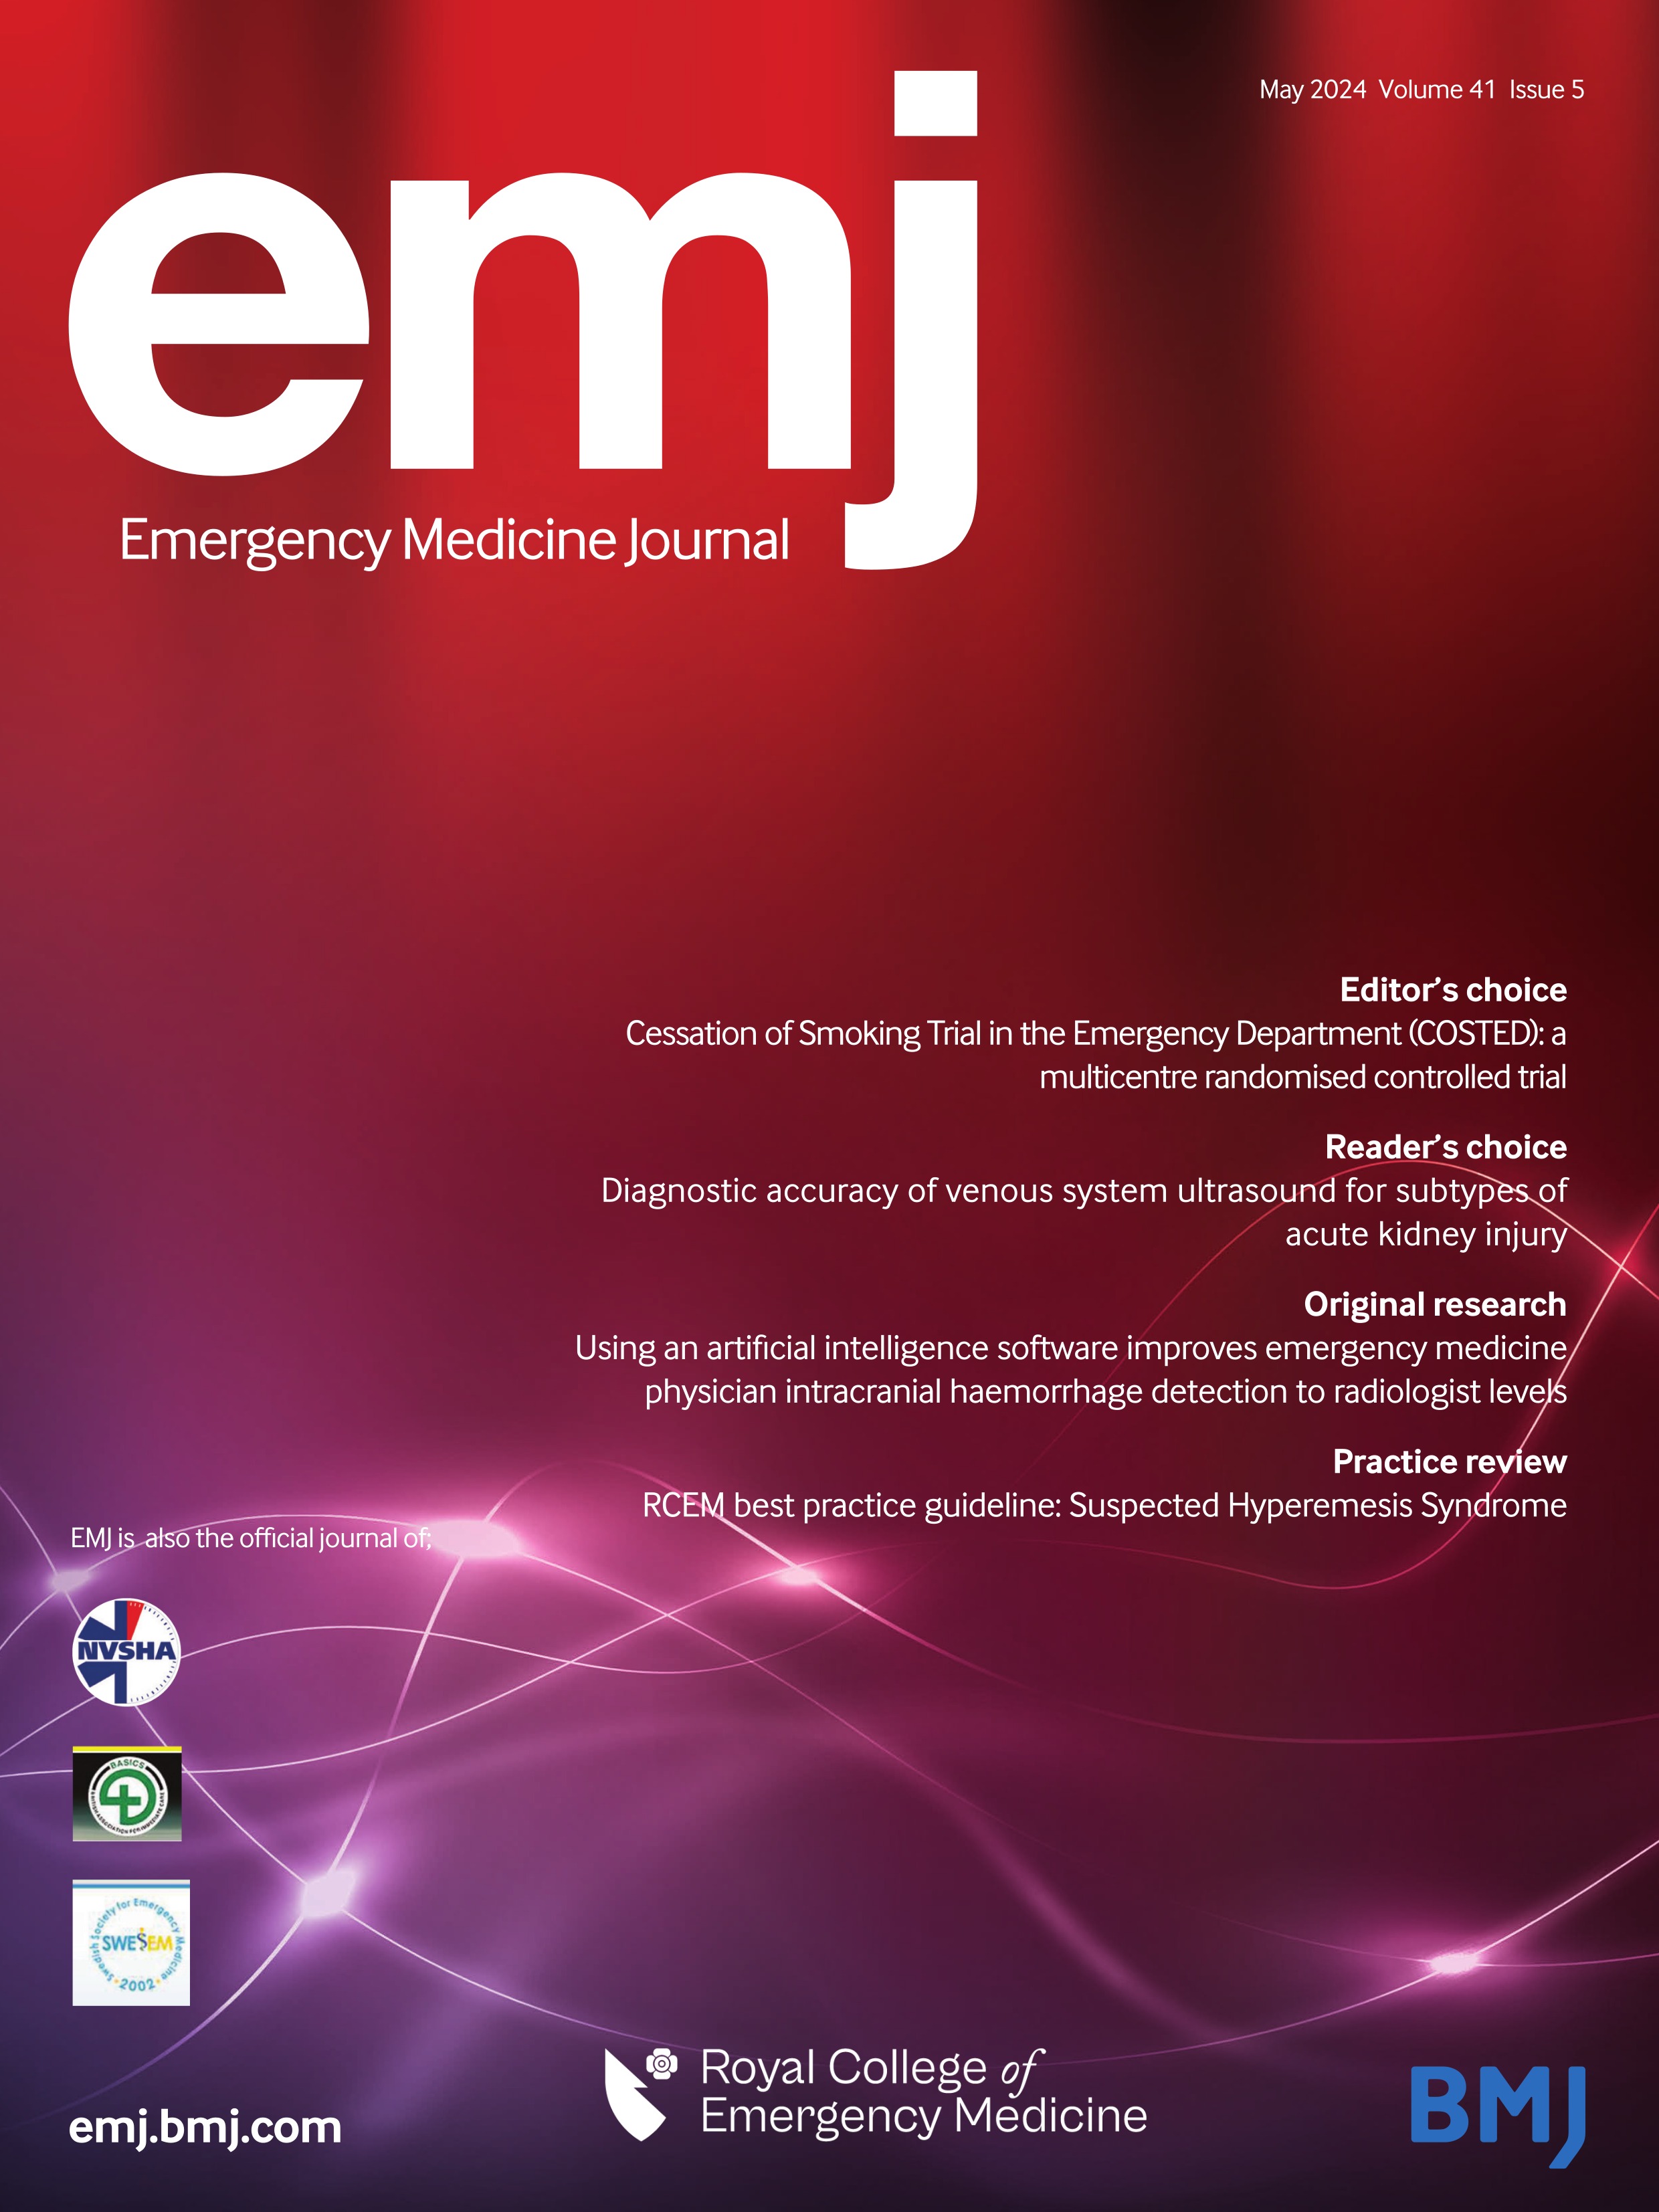 Cessation of Smoking Trial in the Emergency Department (COSTED): a multicentre randomised controlled trial